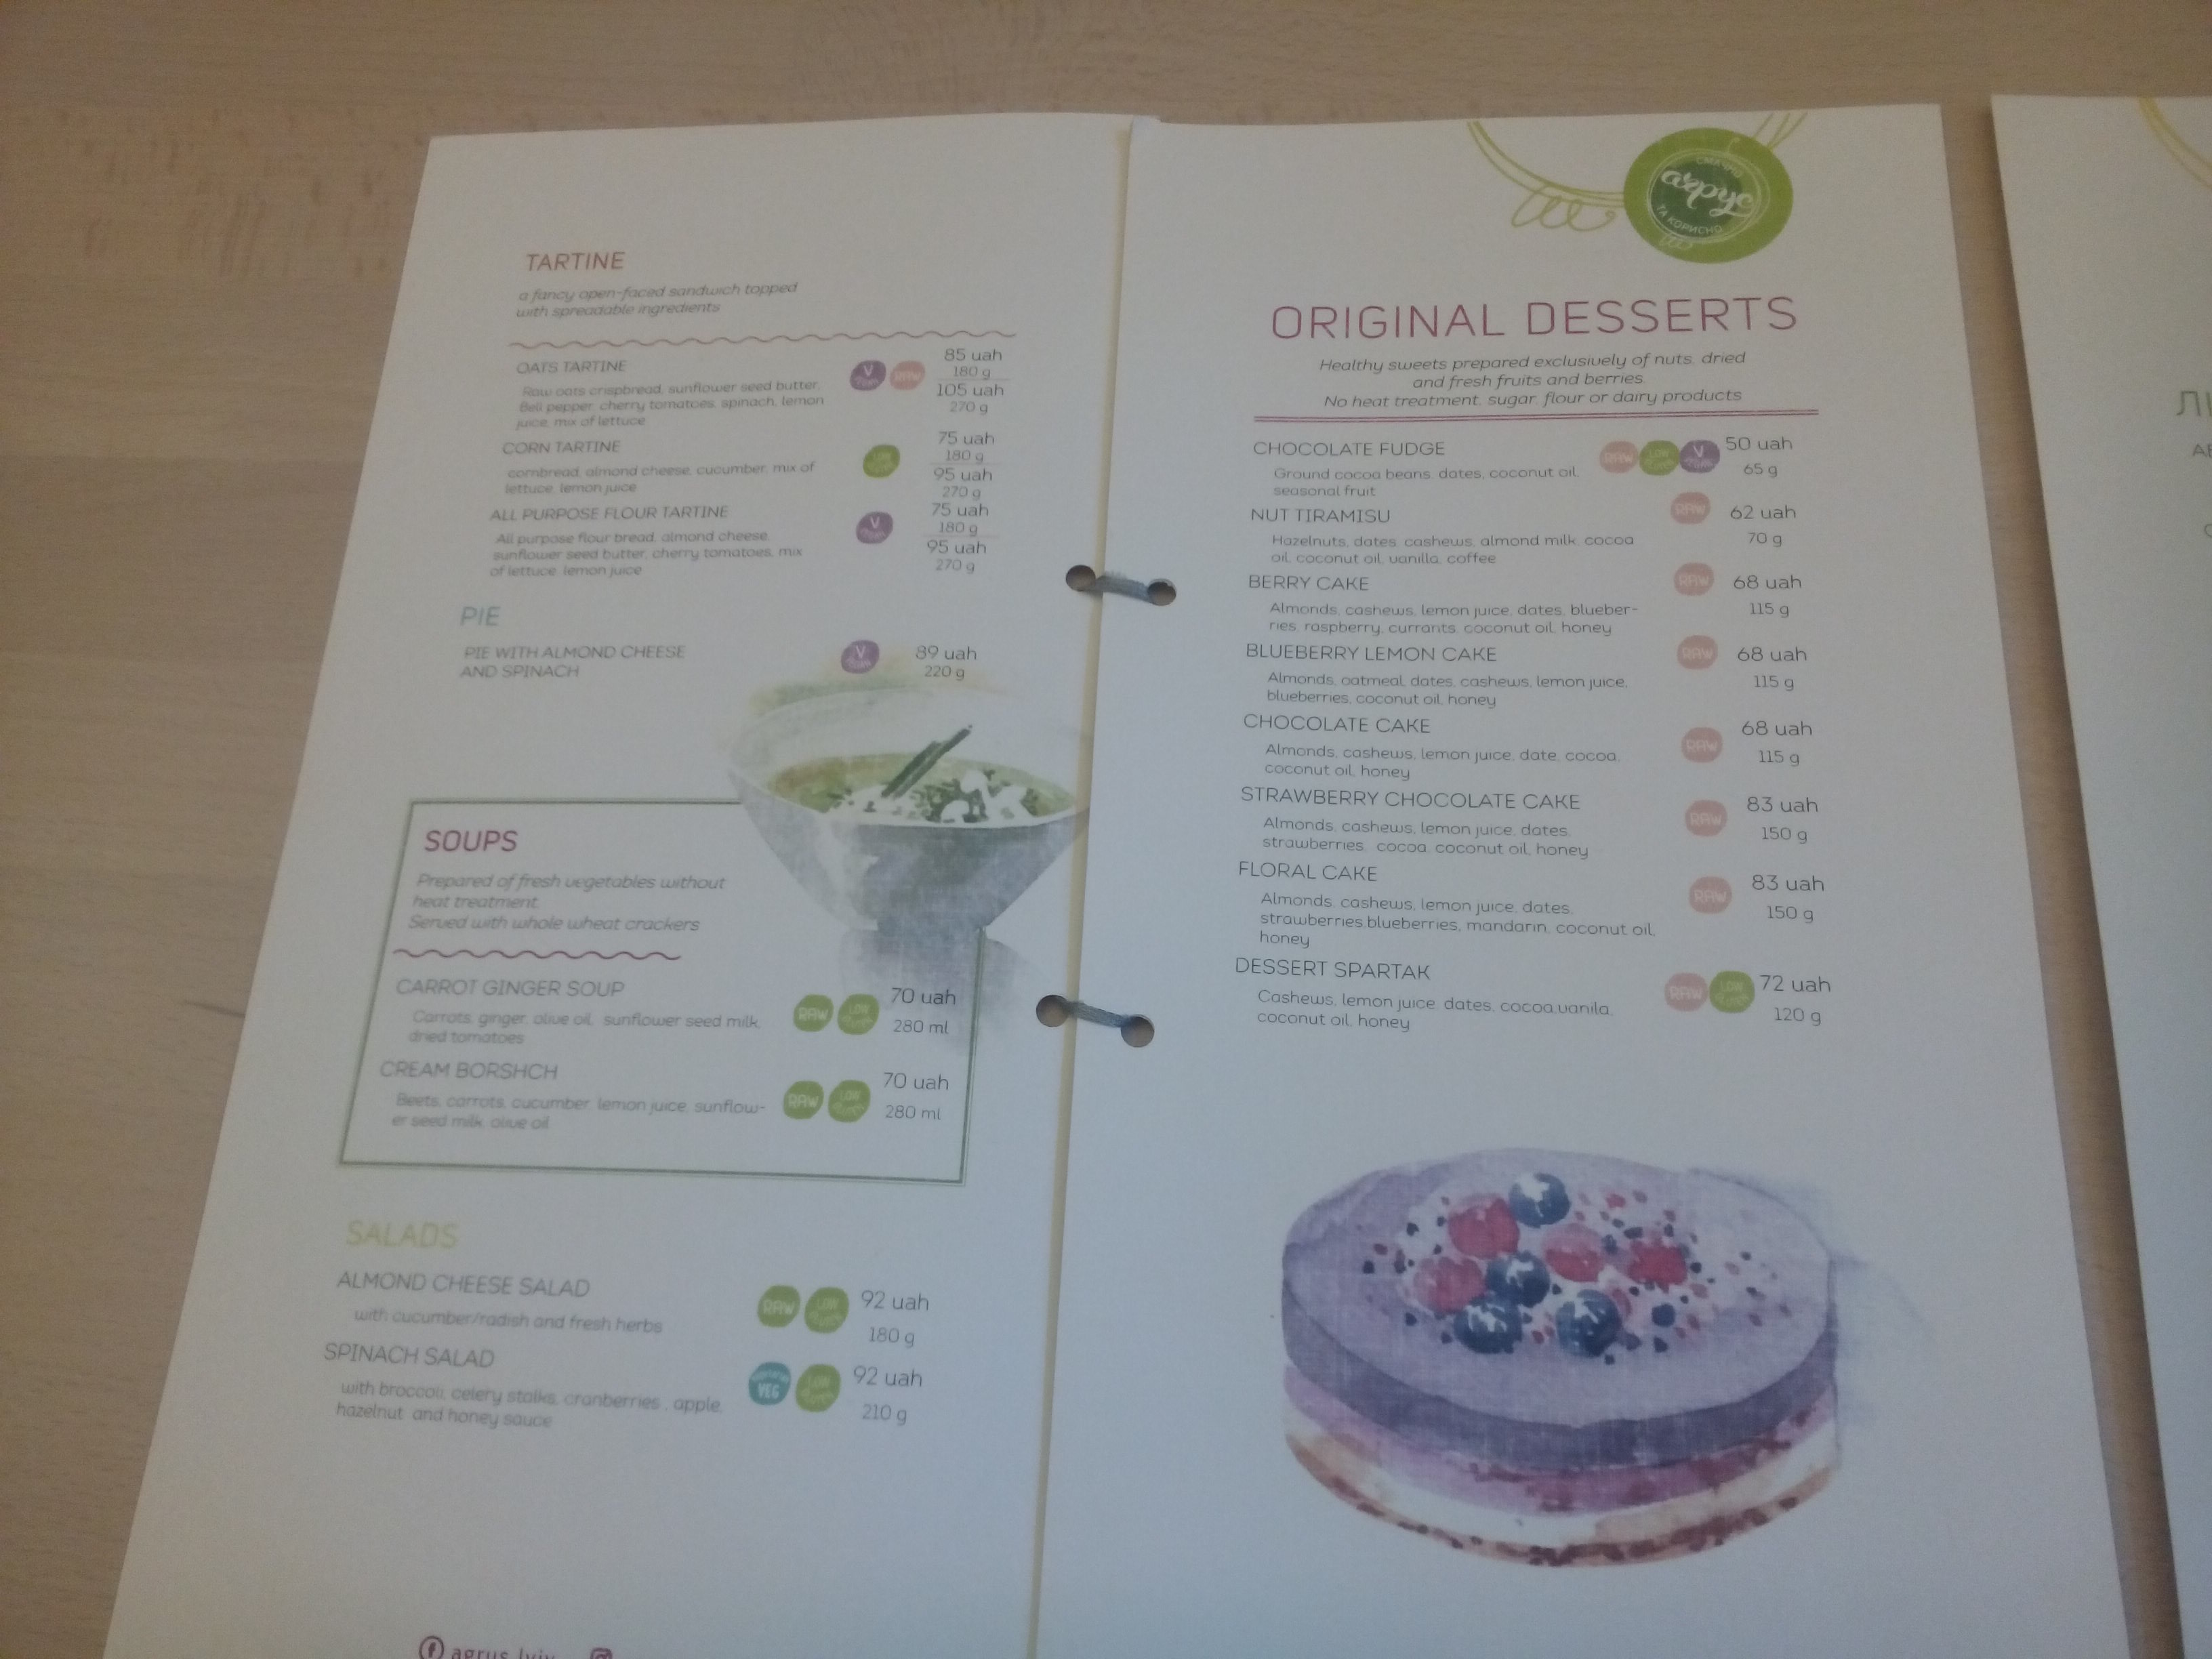 Colourful paper menus for tarts, soups, salads and desserts